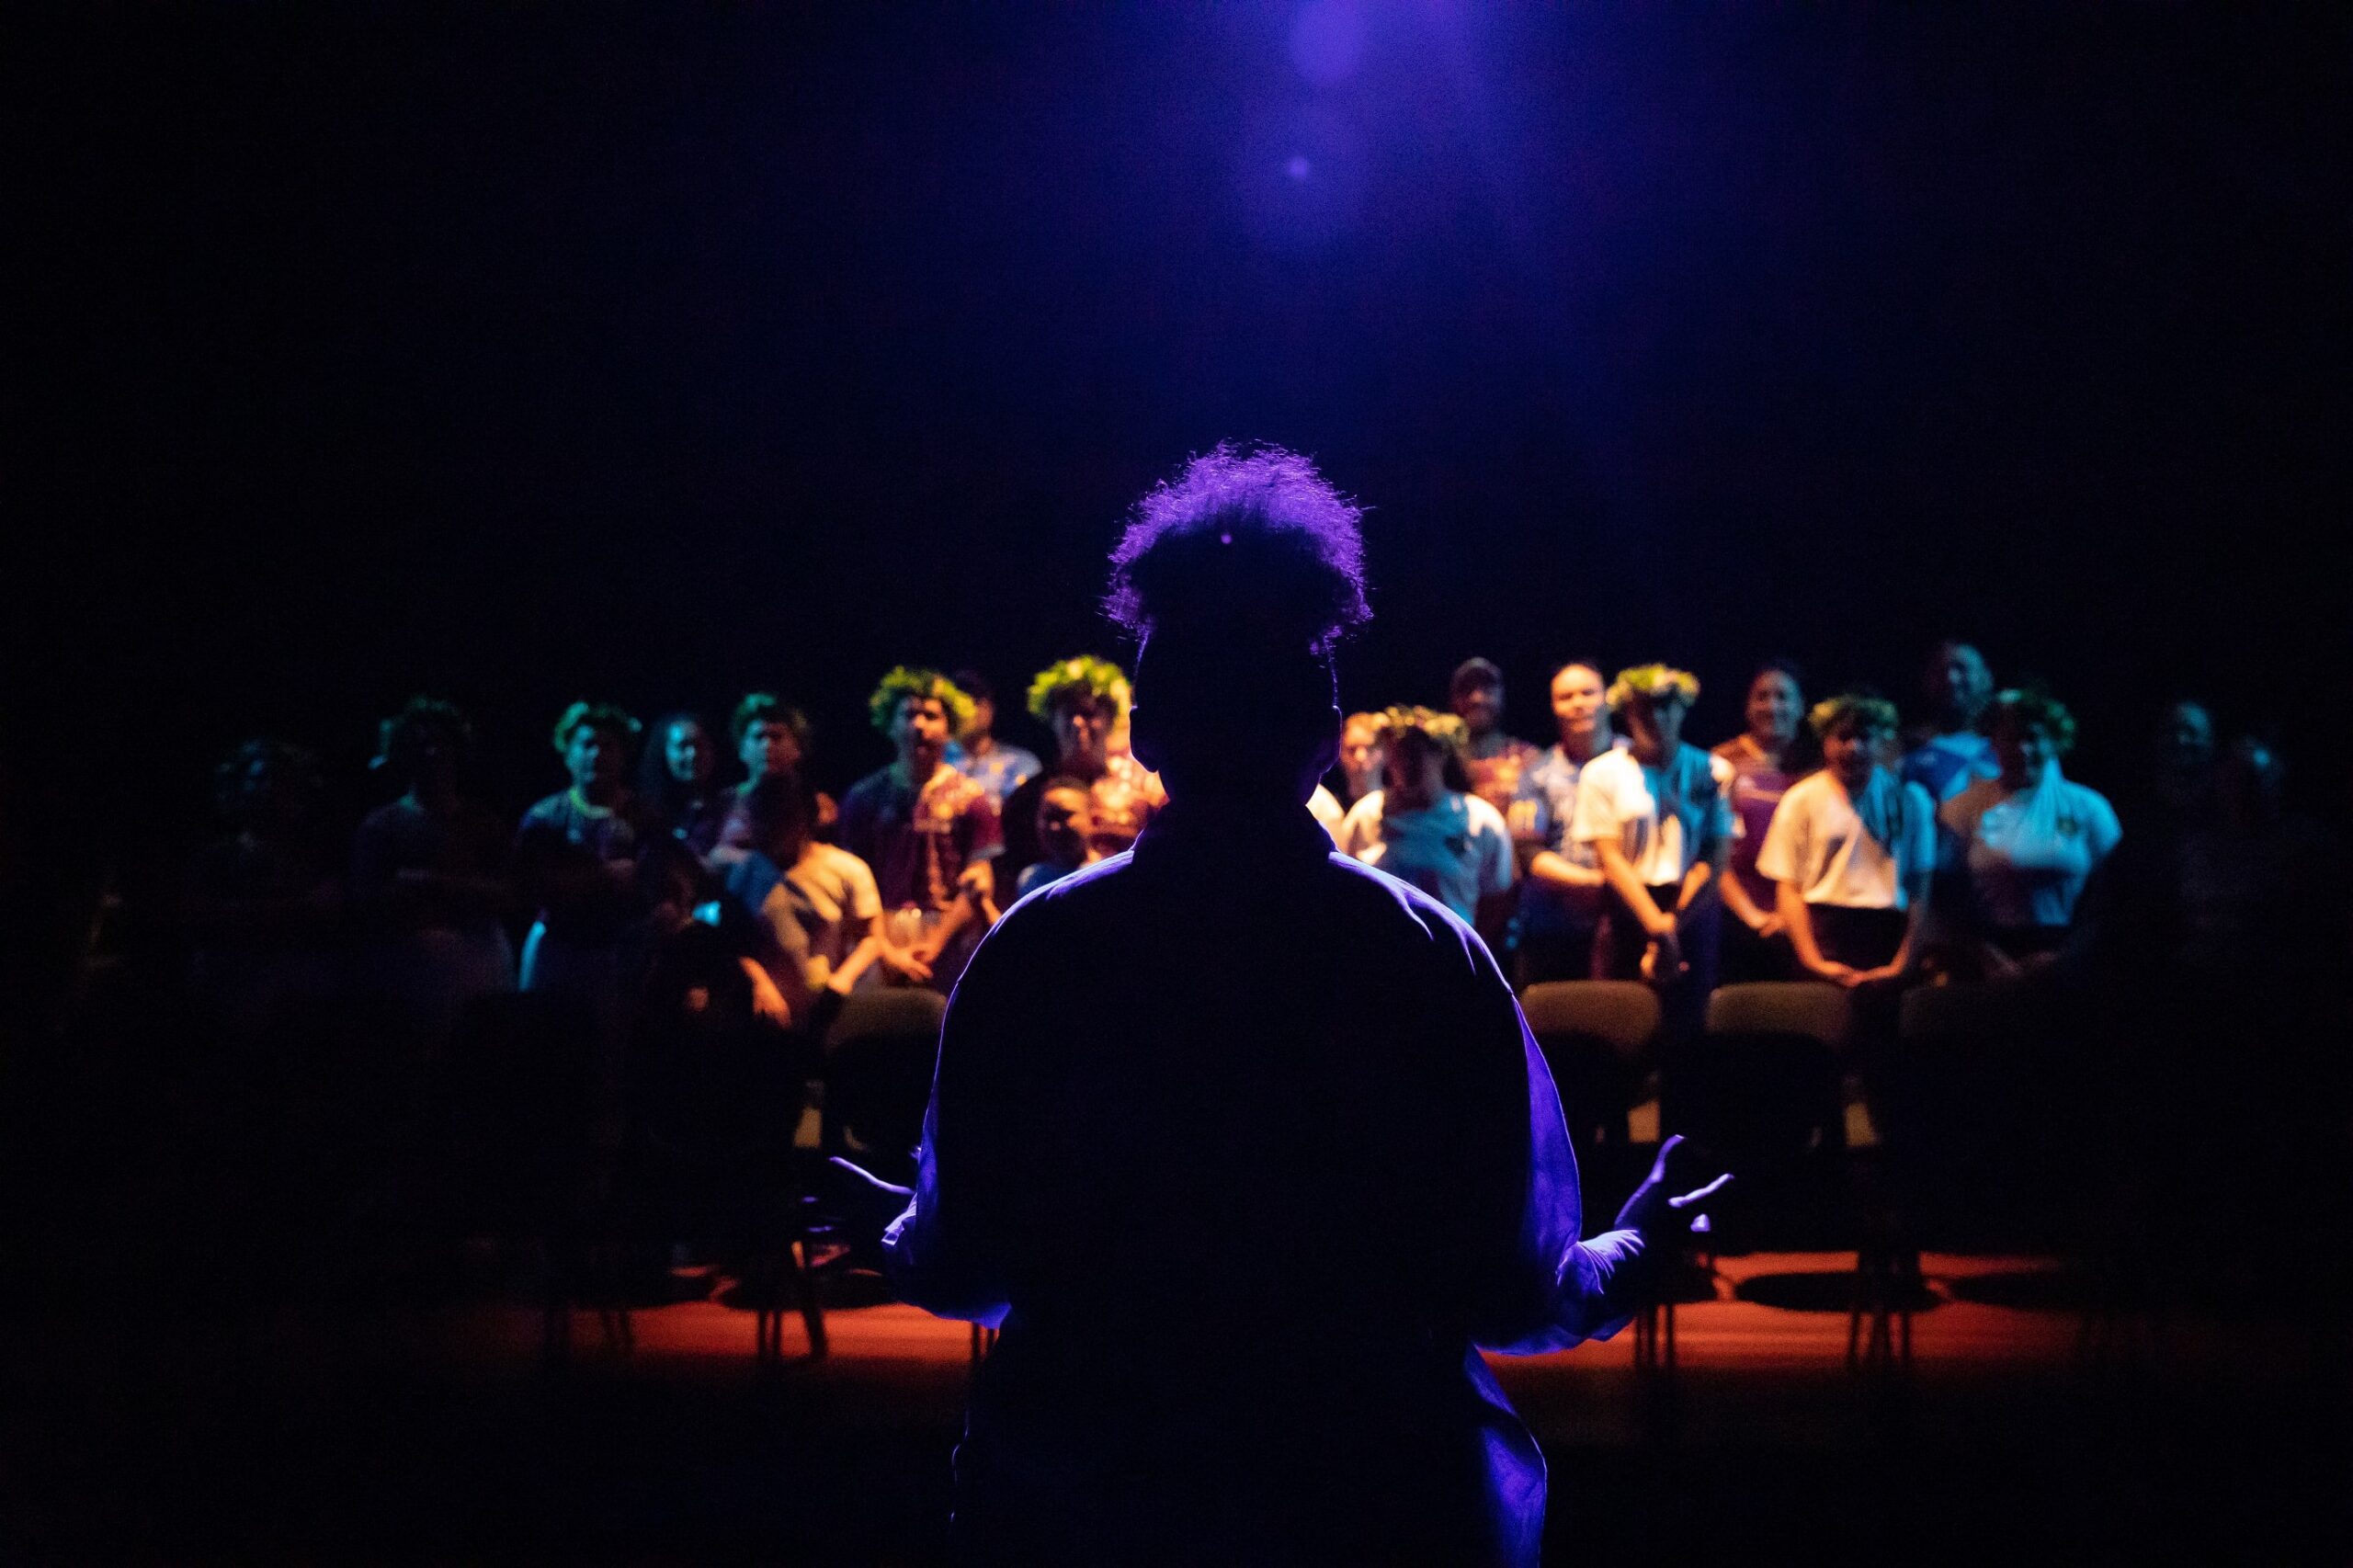 A person with their back to the camera stands infront of a seating bank full of young members of a choir. The lighting is blue.